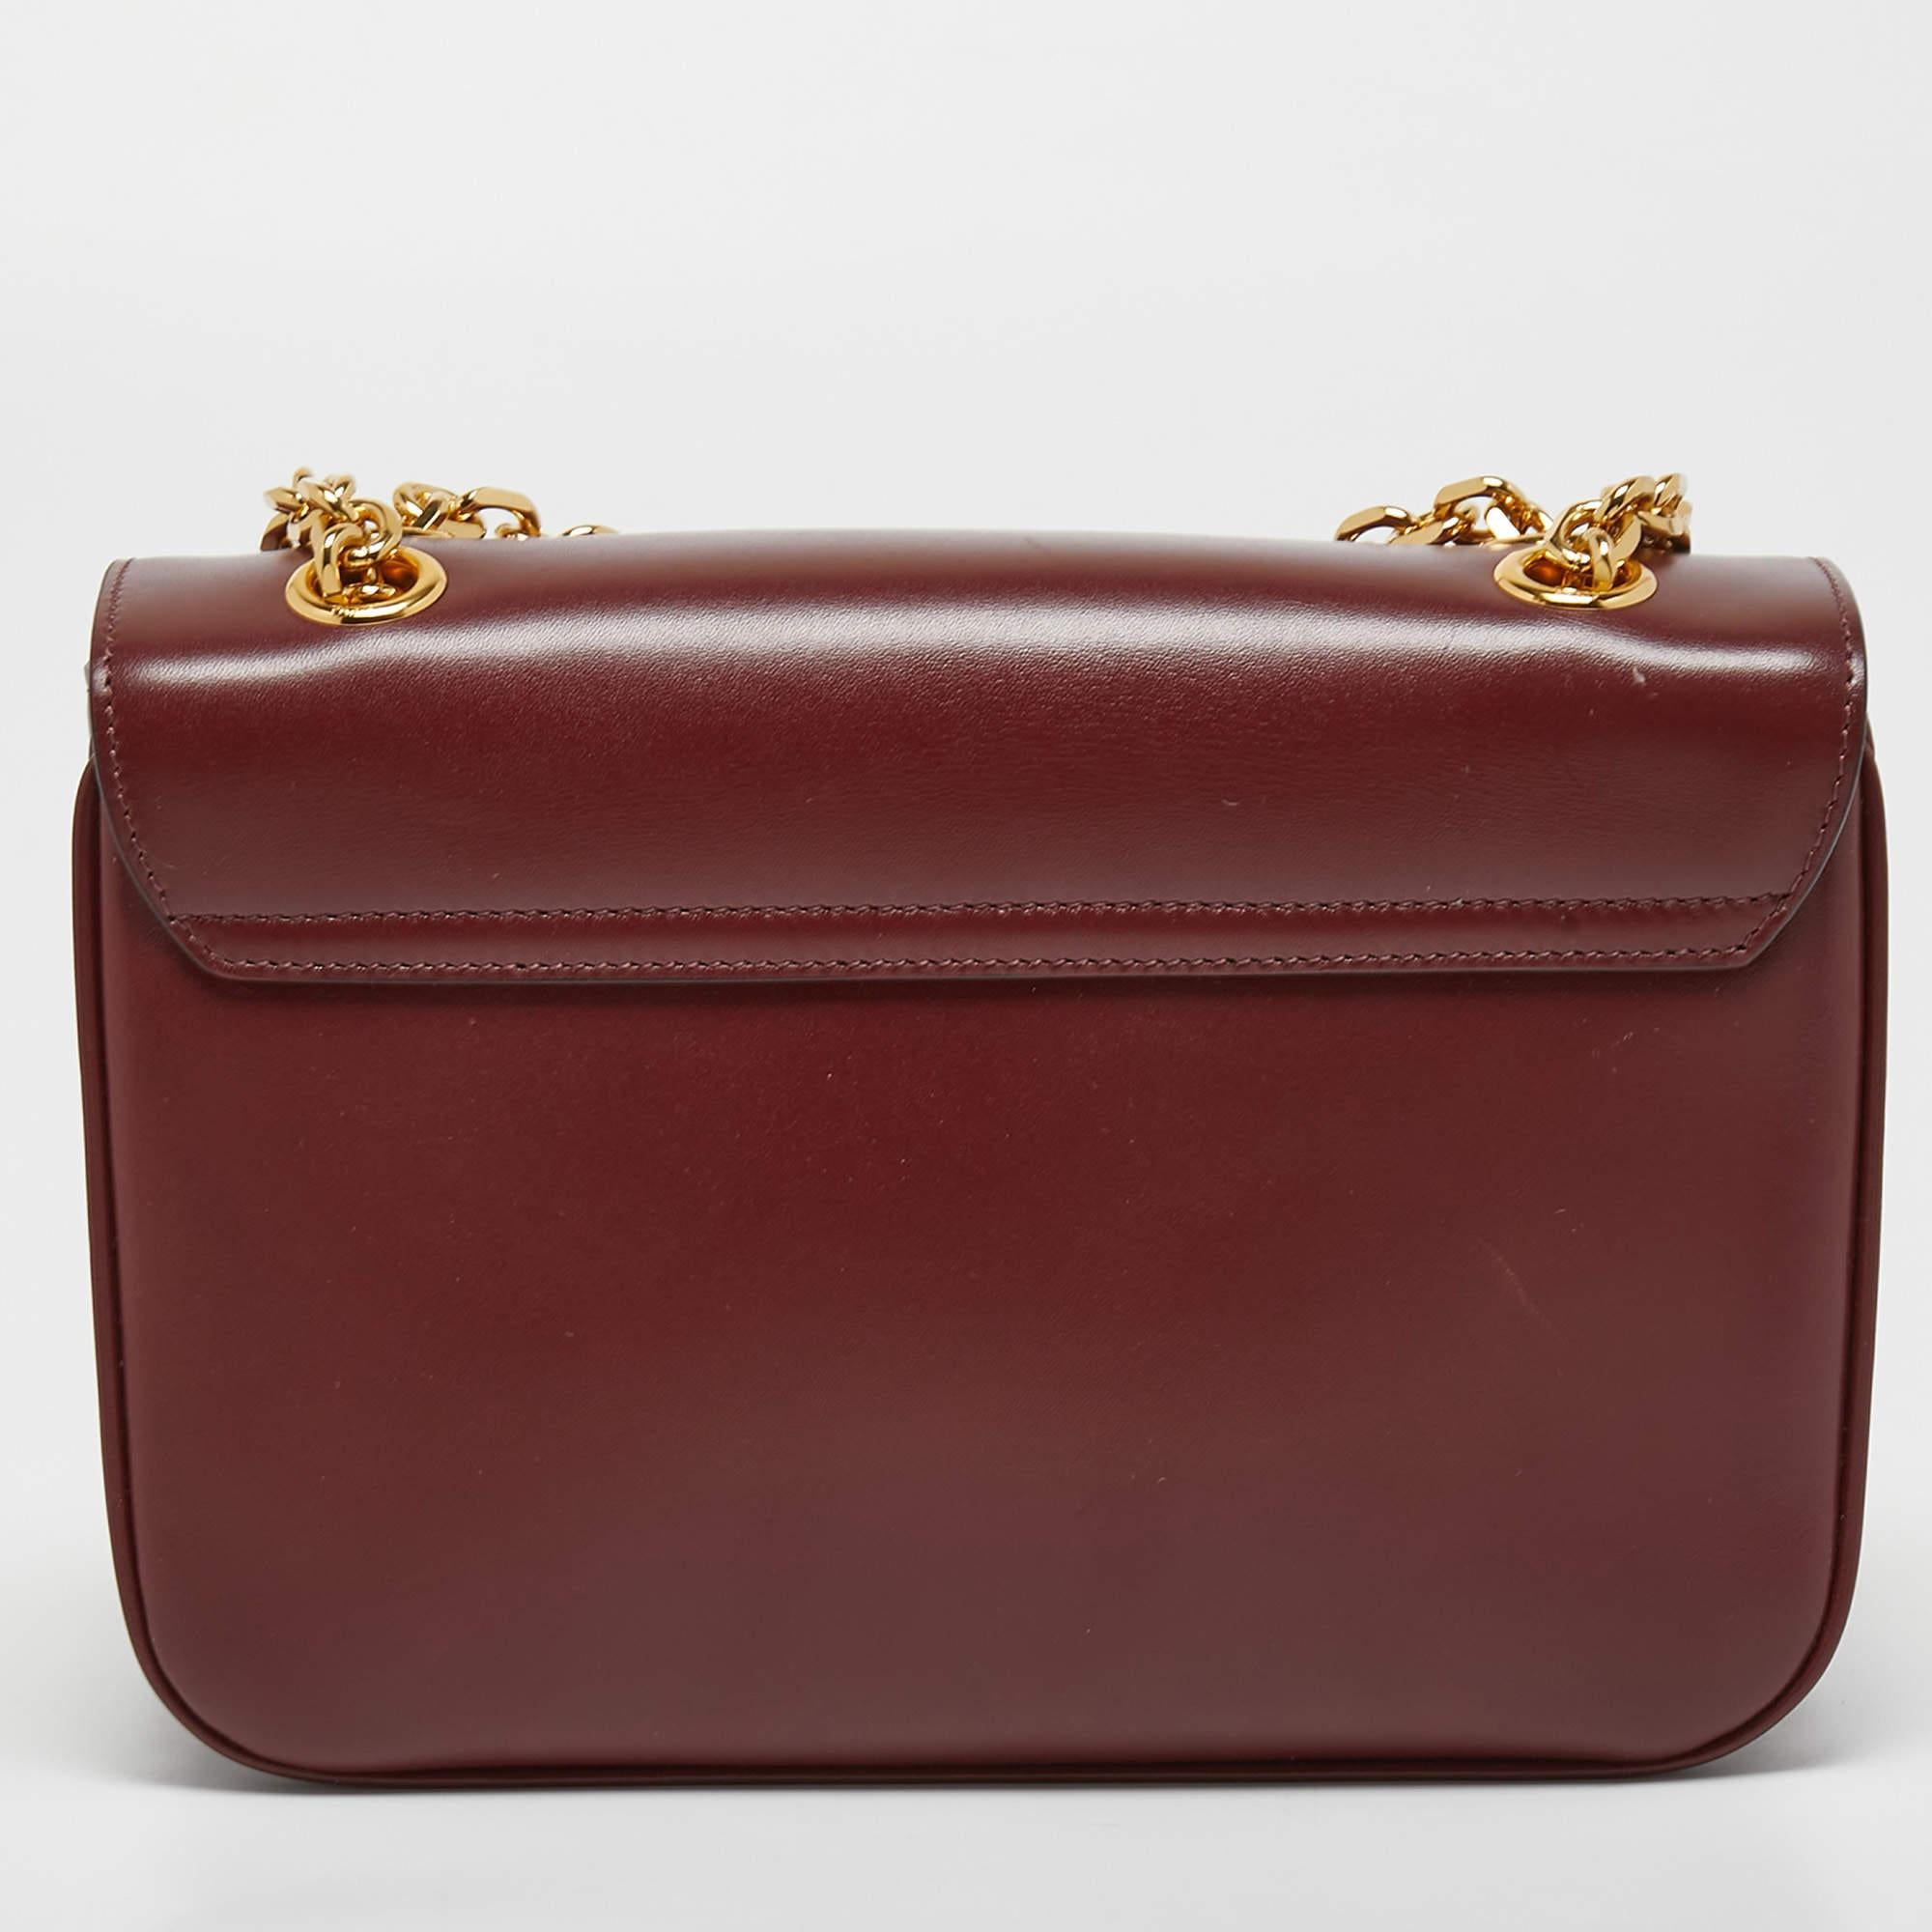 The Celine bag exudes elegance with its rich burgundy leather exterior. It features a sleek and structured silhouette, adorned with the iconic Celine logo in gold-tone hardware. The bag is equipped with a comfortable shoulder strap, making it a